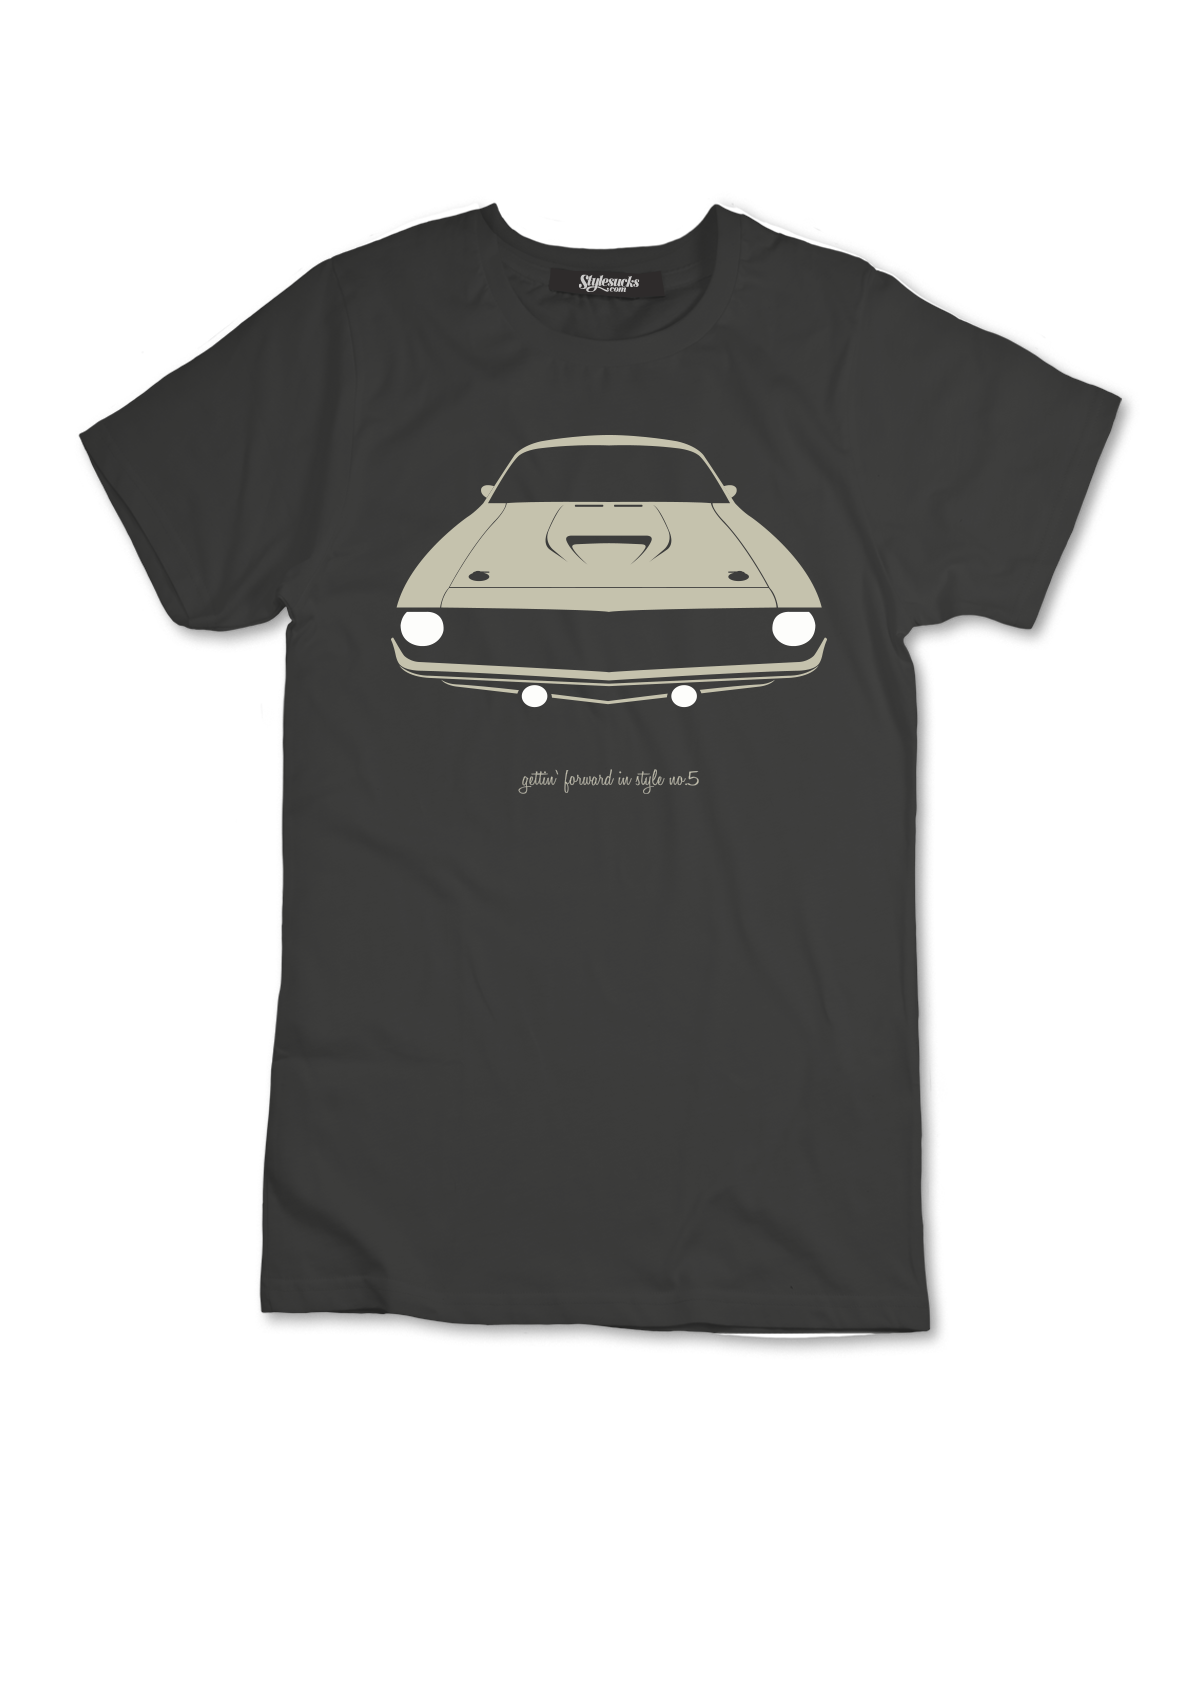 Gettin' forward in style Part No.5 T-Shirt